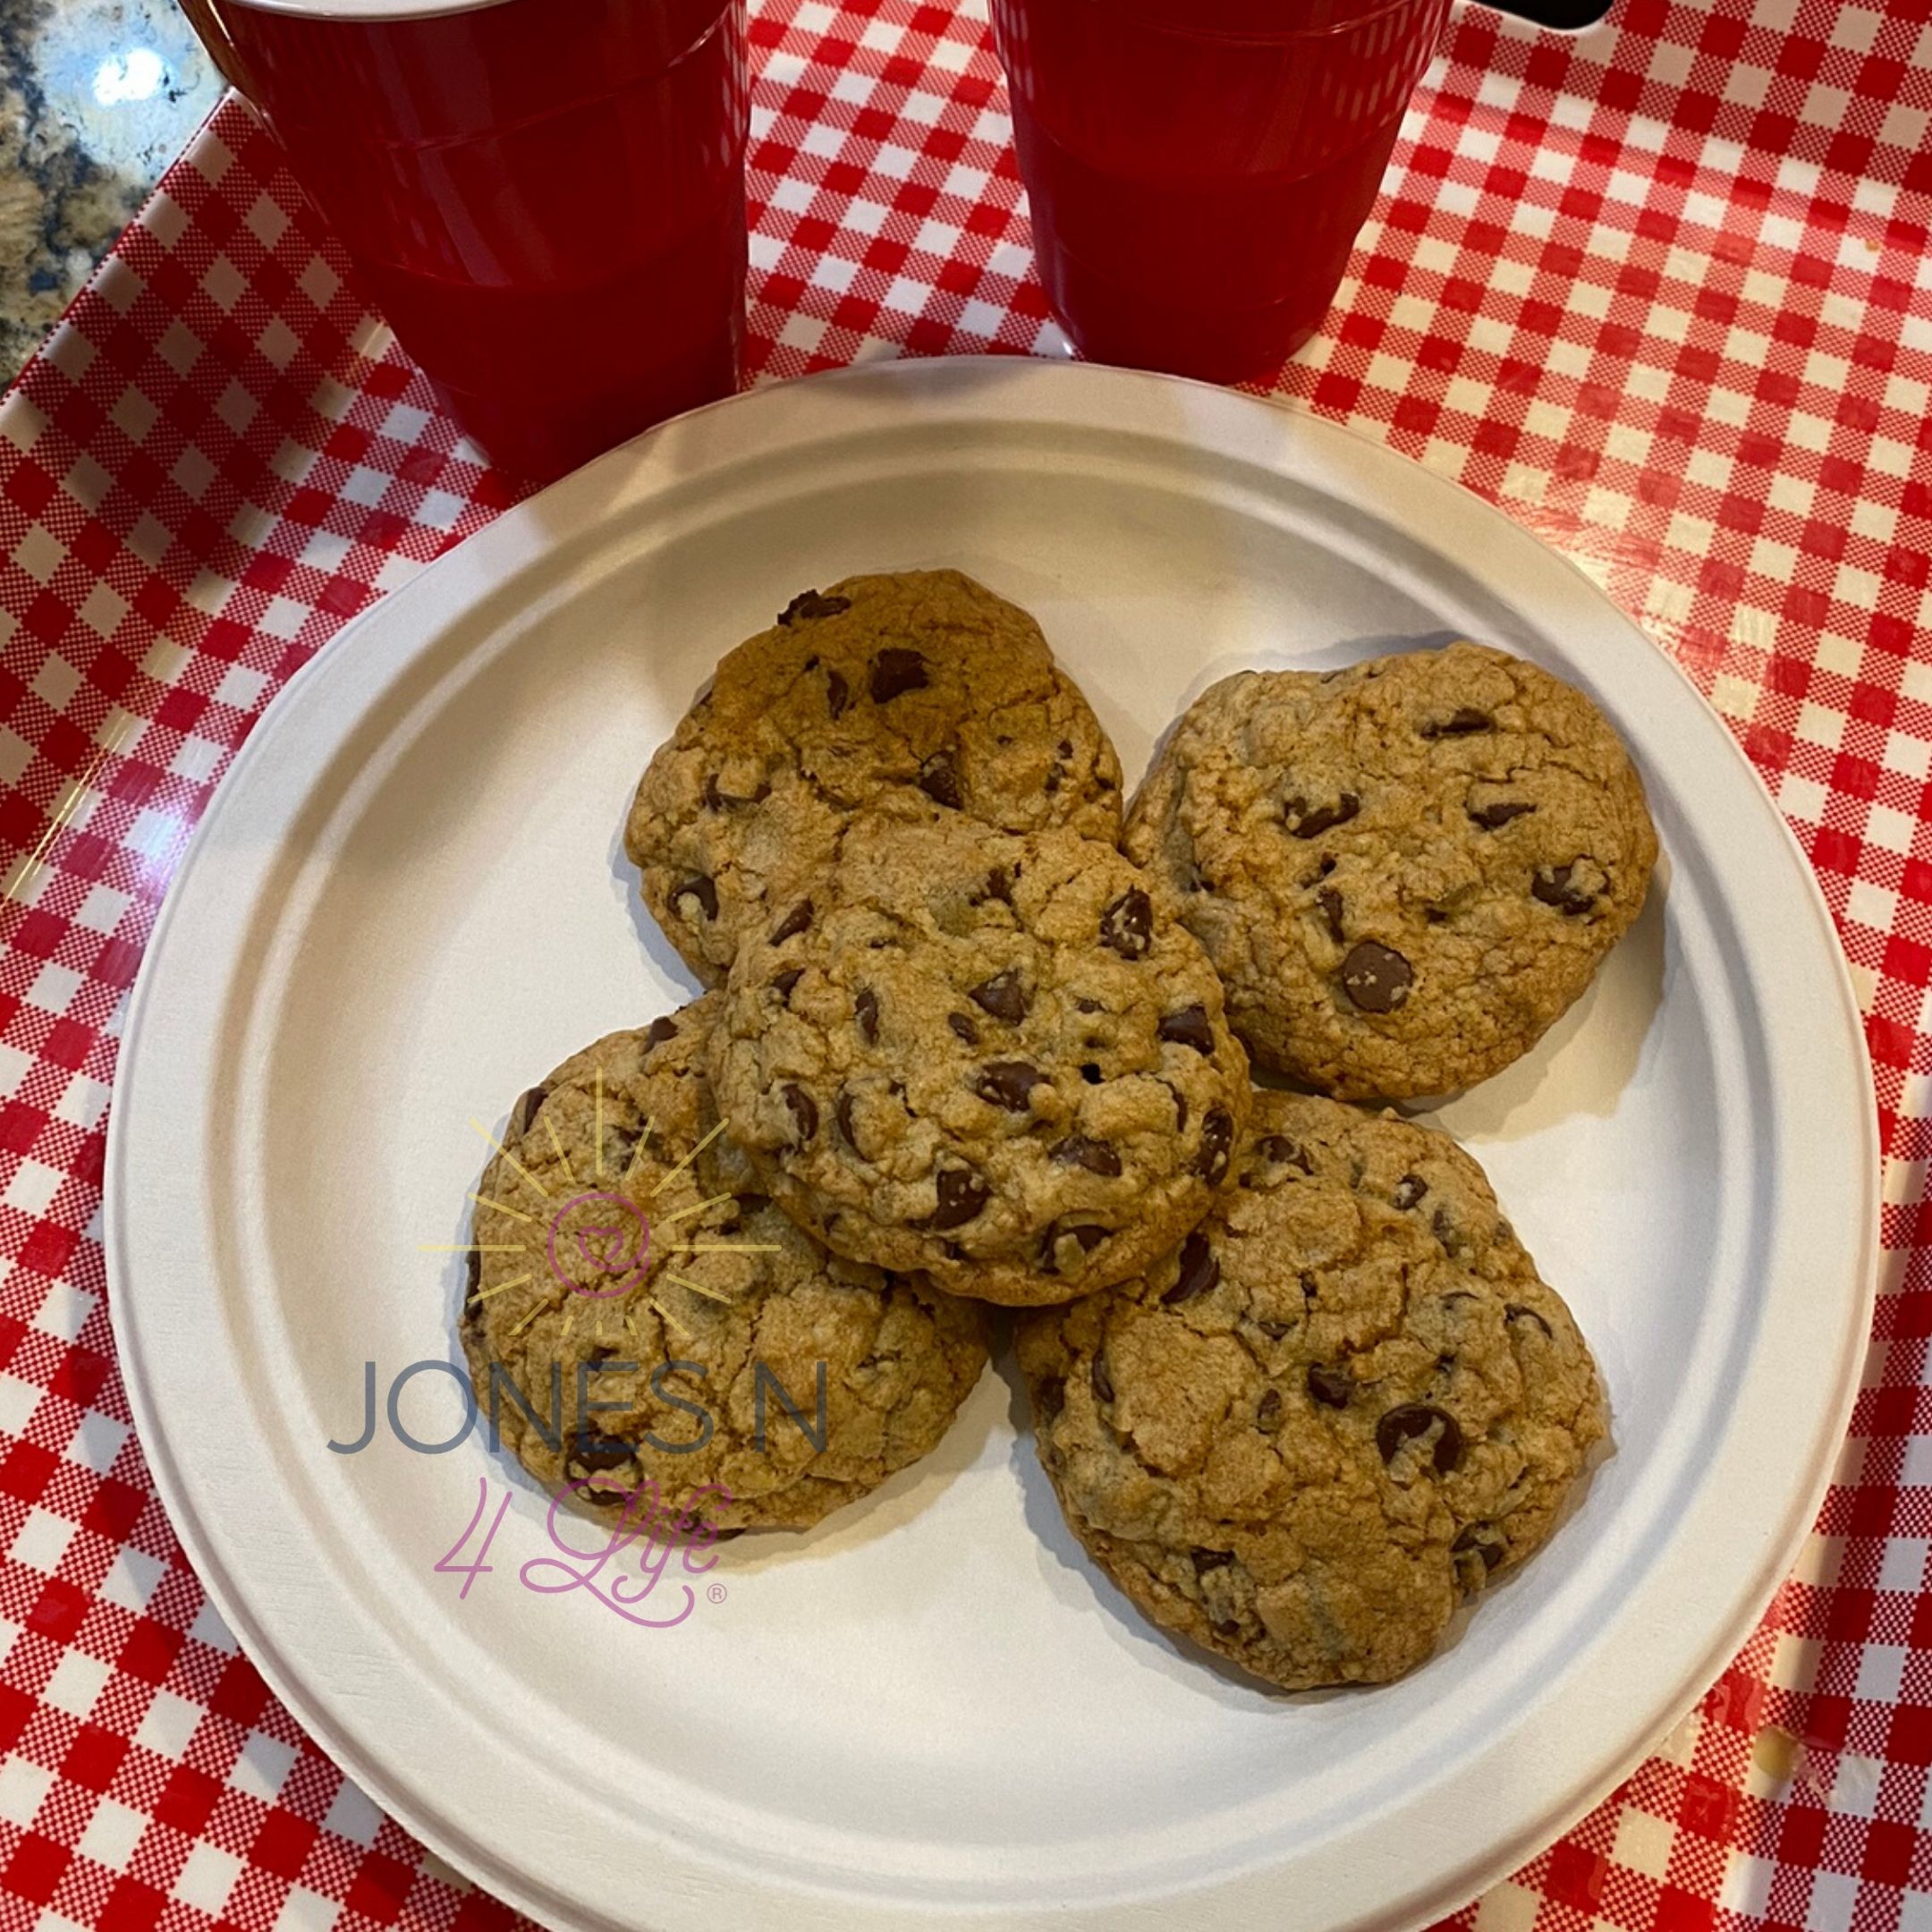 Chocolate chip cookies on a white paper place on top of red an white checkered tray.